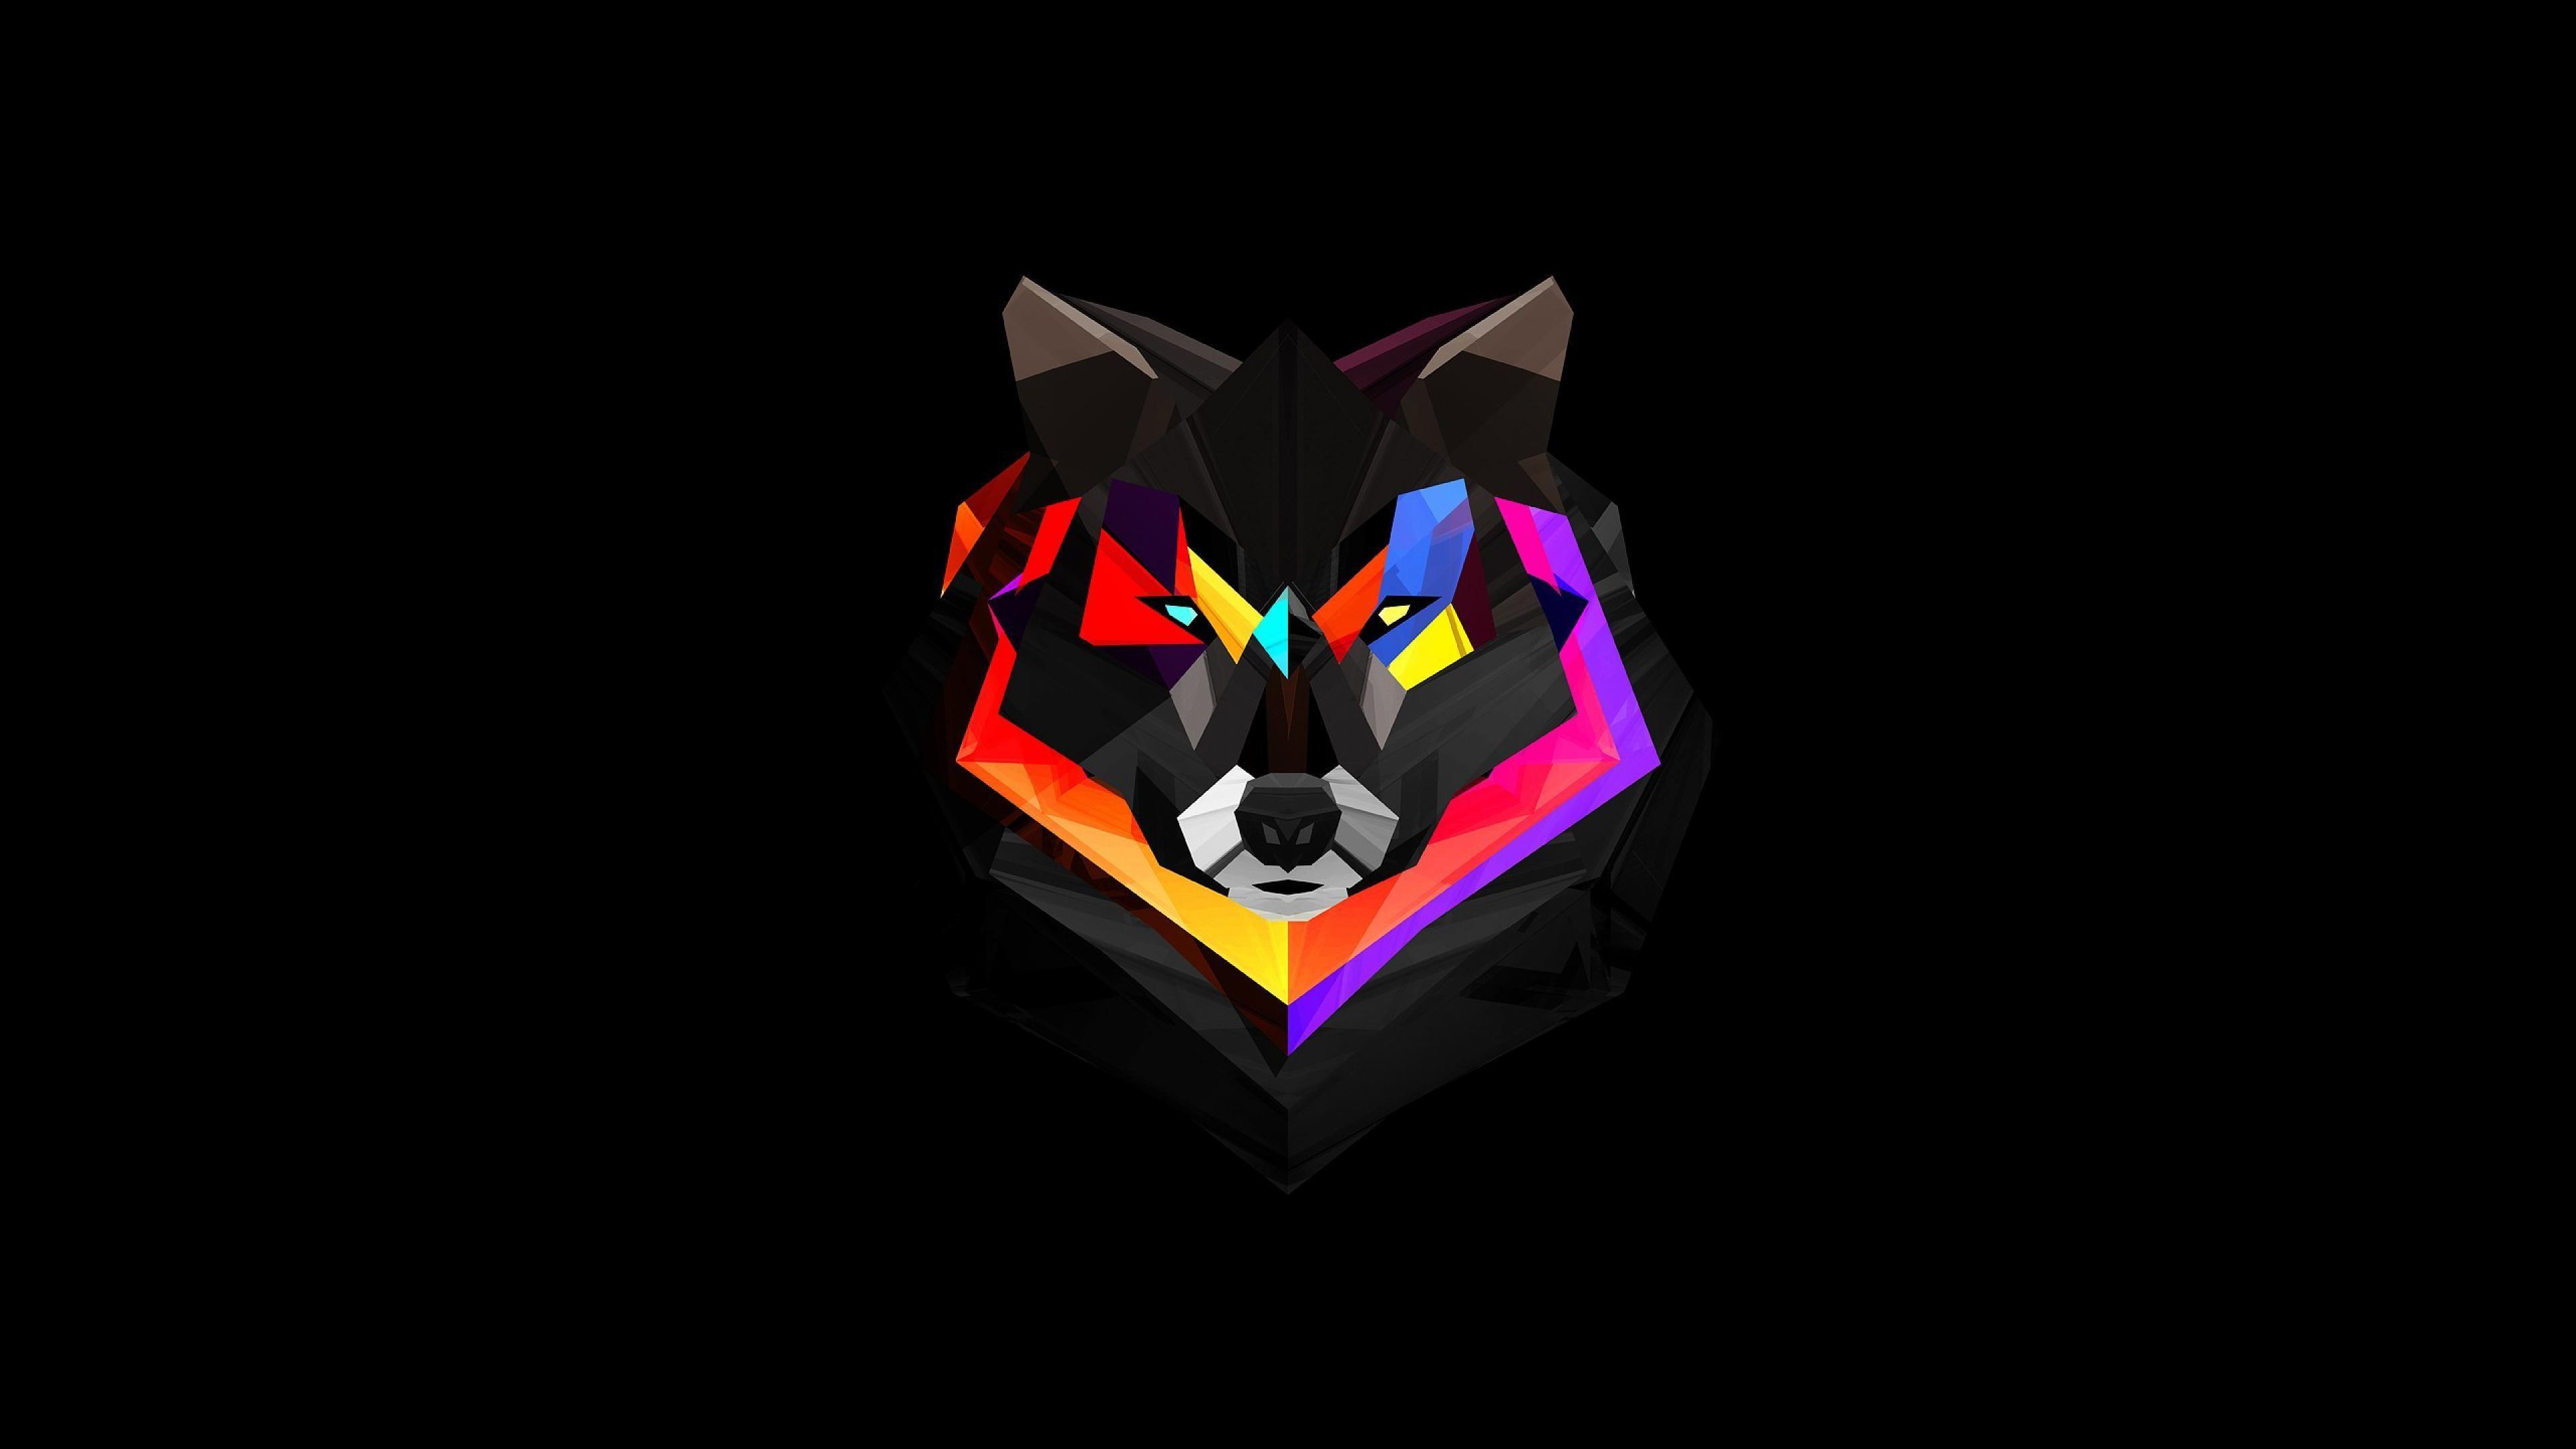 Colorful Wolf Logo - Abstract Colorful Wolf Face | Abstract Desktop Wallpapers ...